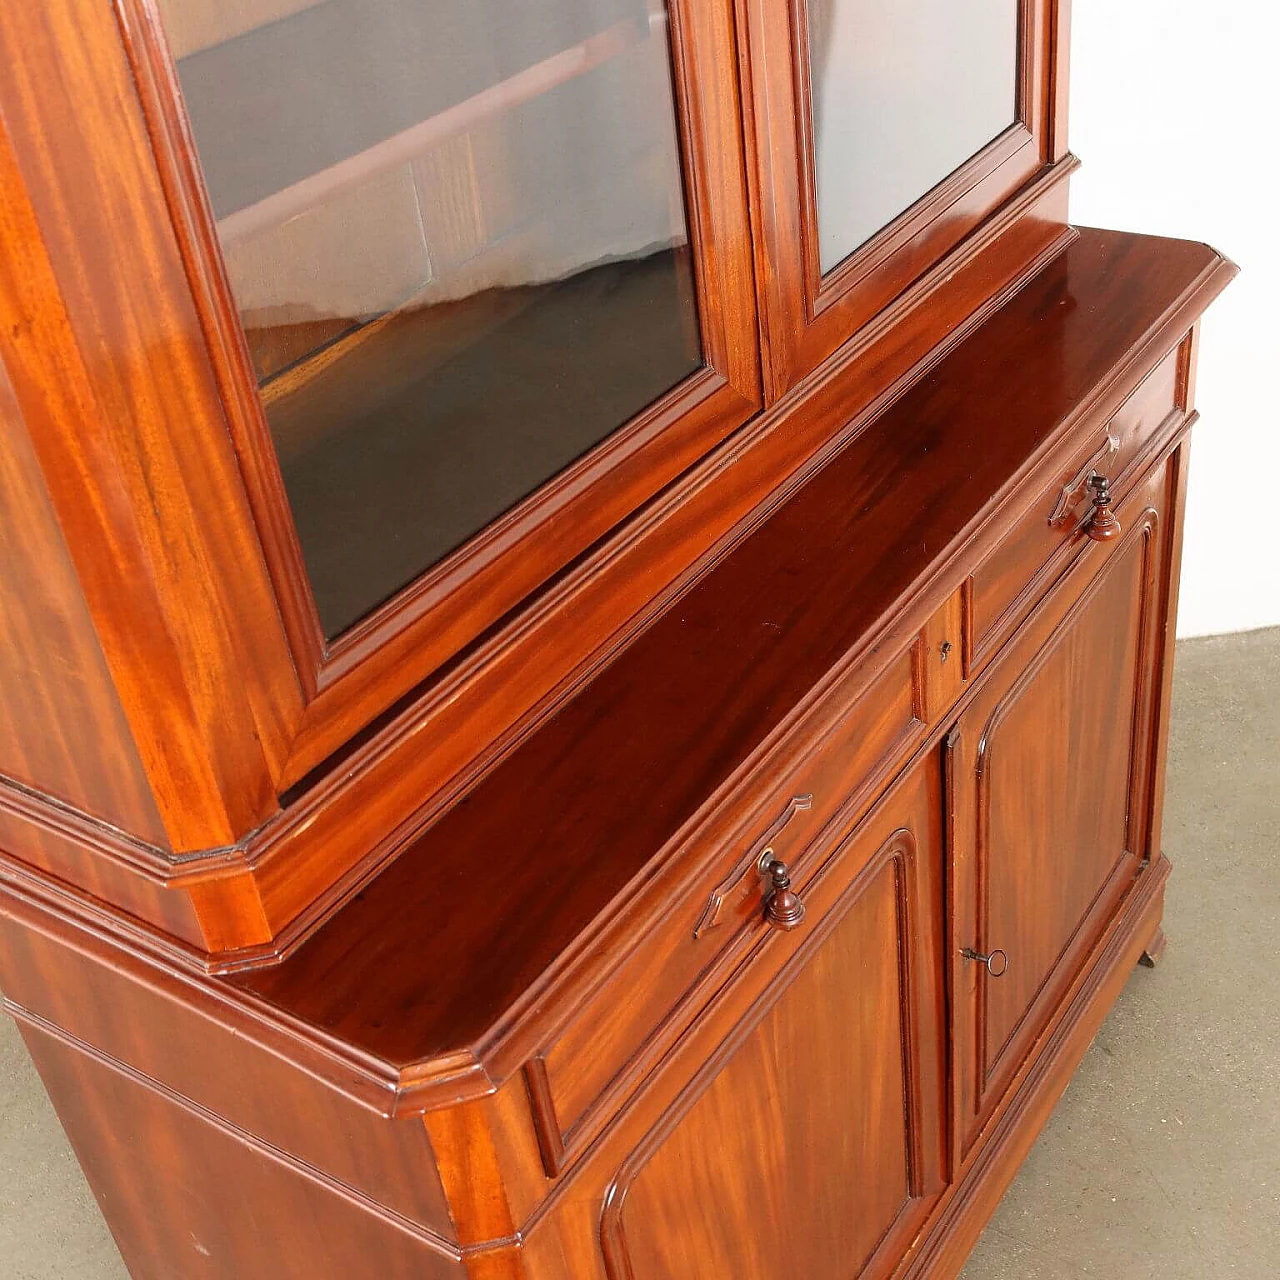 Mahogany bookcase with two glass doors and drawers, late 19th century 5